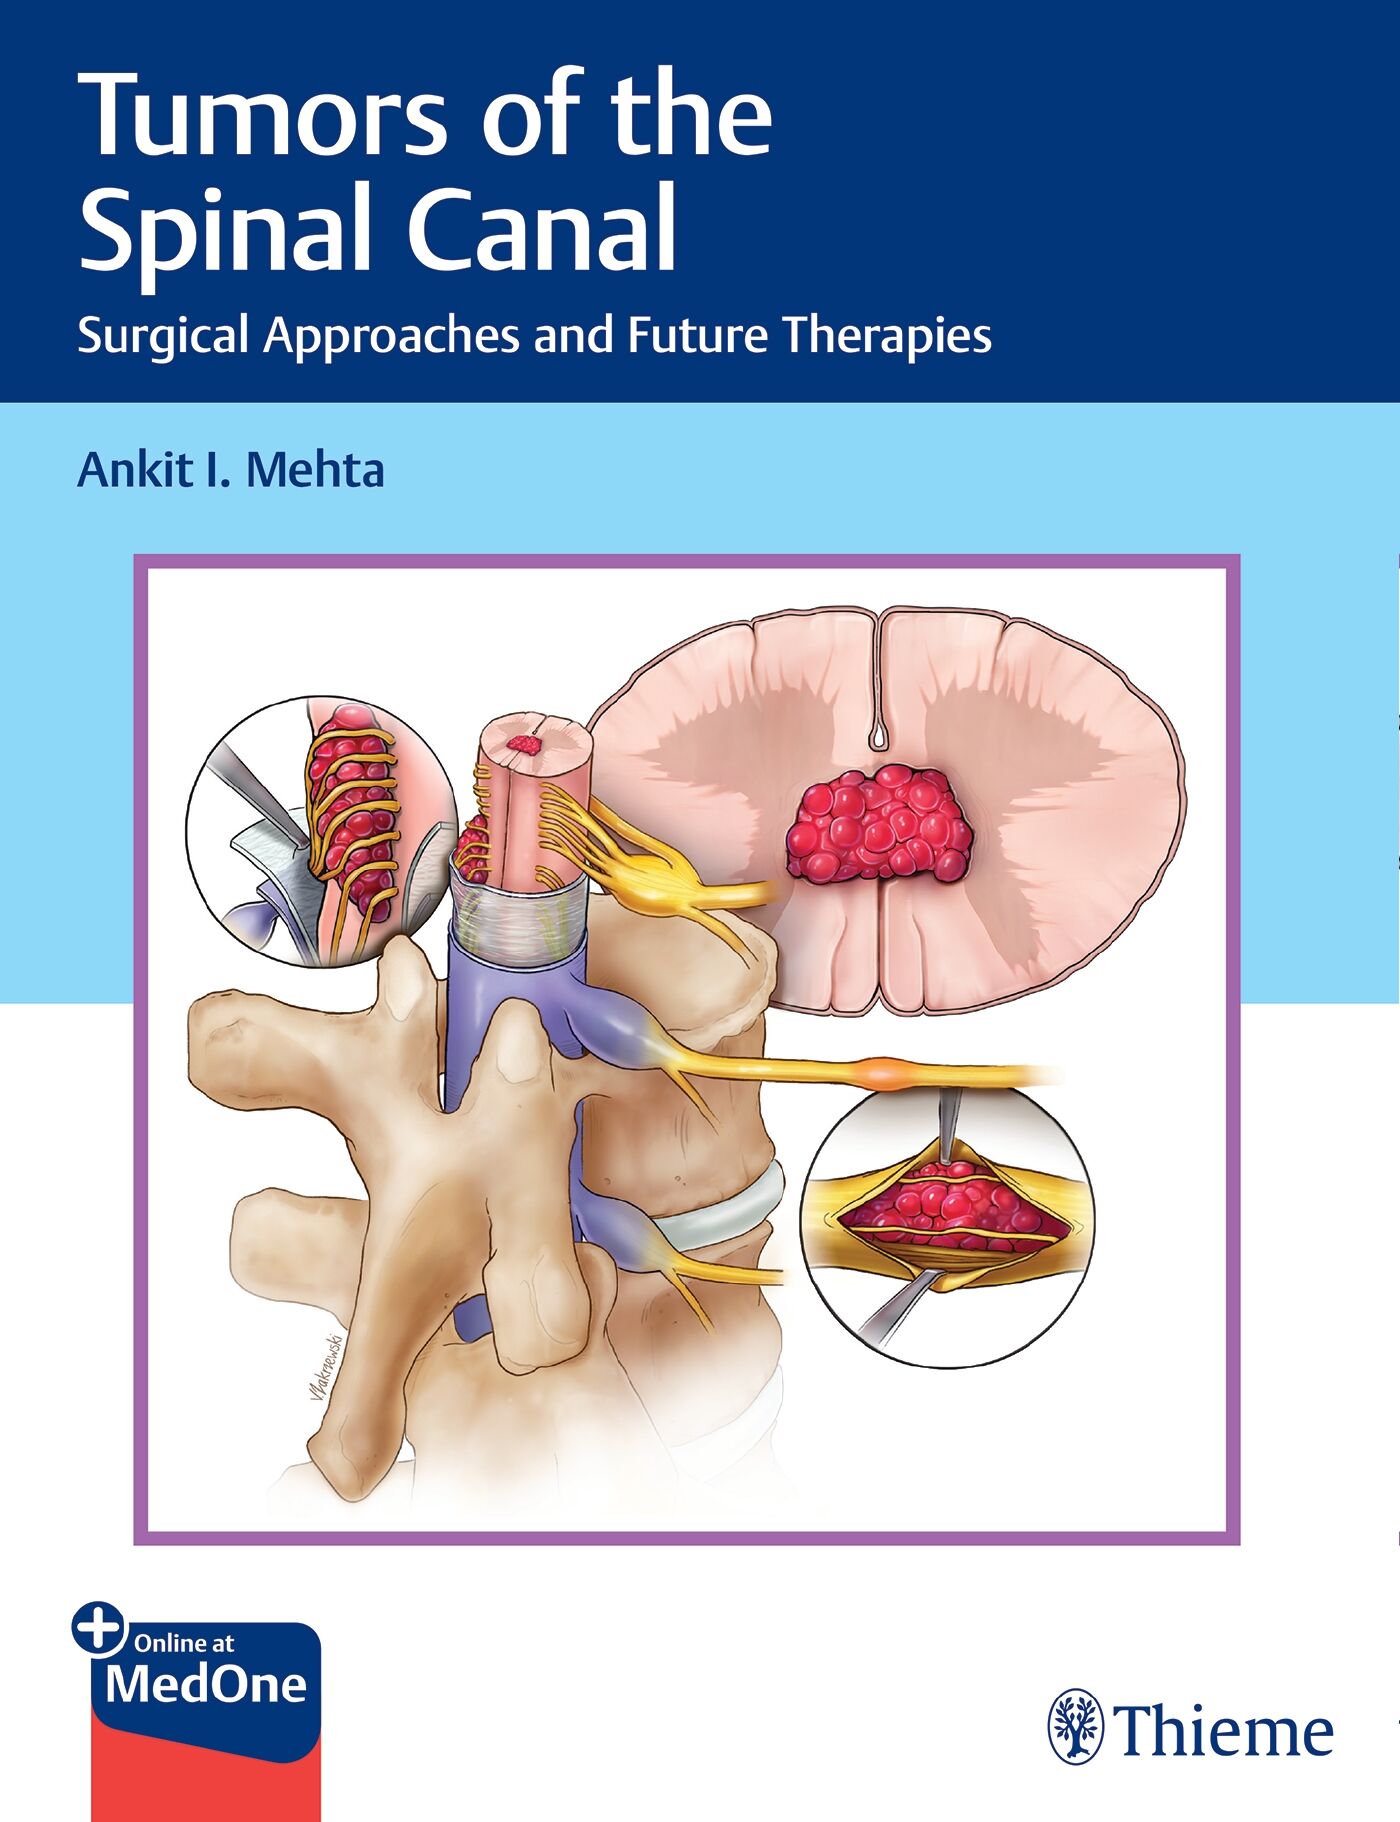 Tumors of the Spinal Canal, 9781626239319